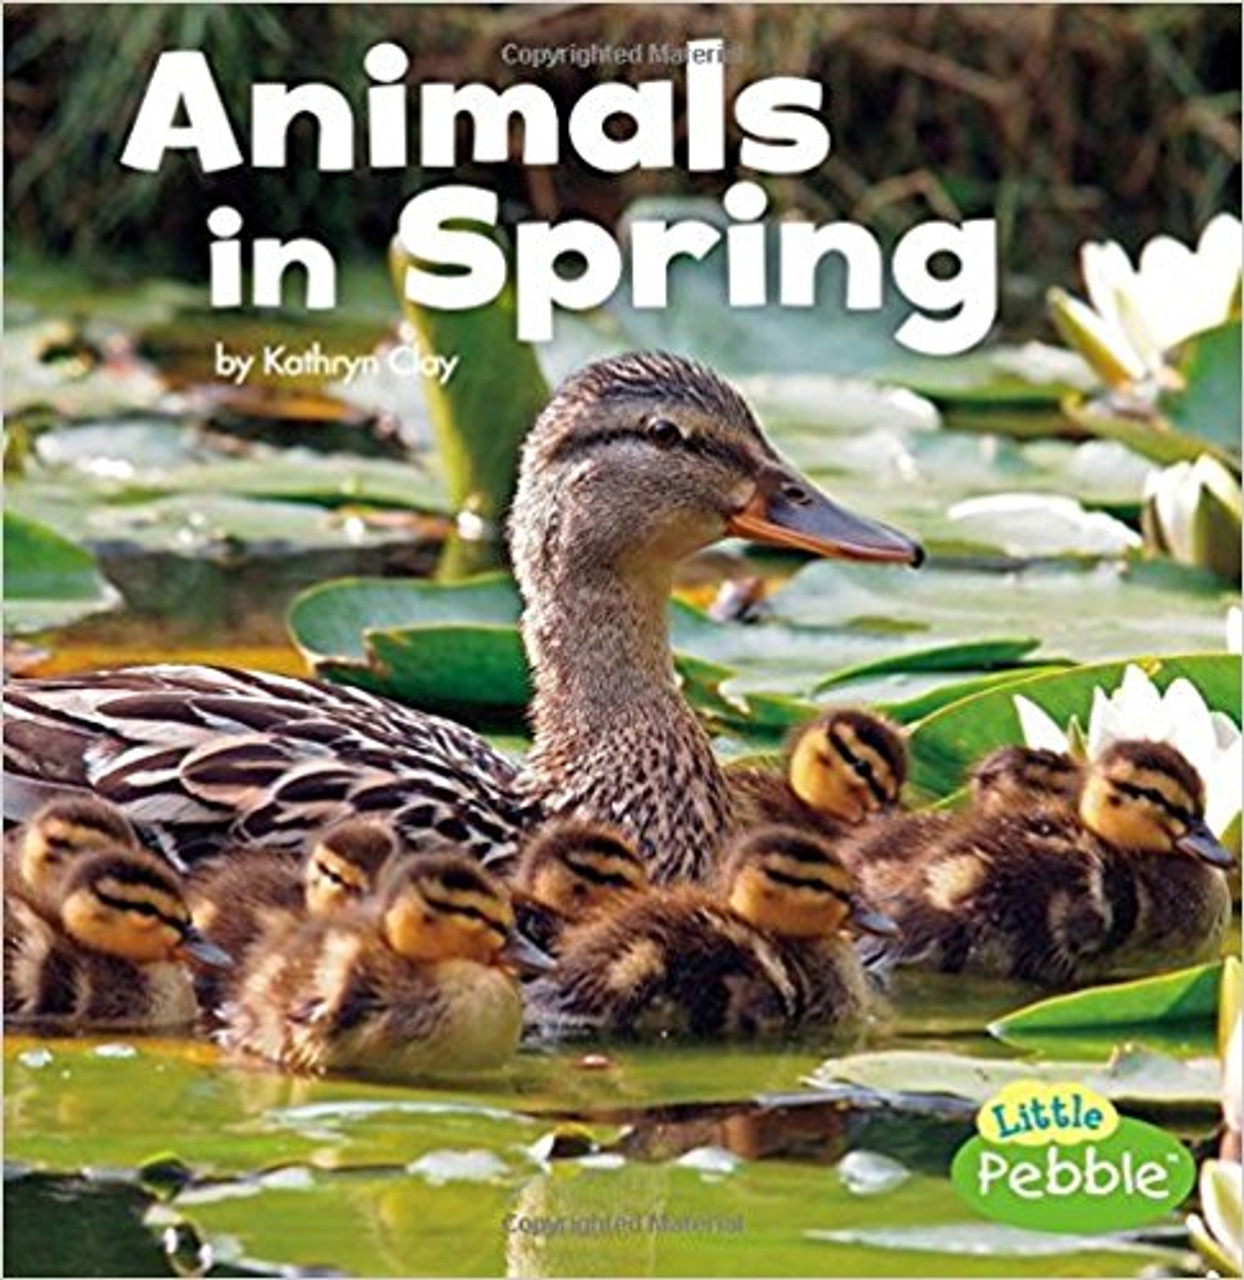 Animals in Spring by Kathryn Clay